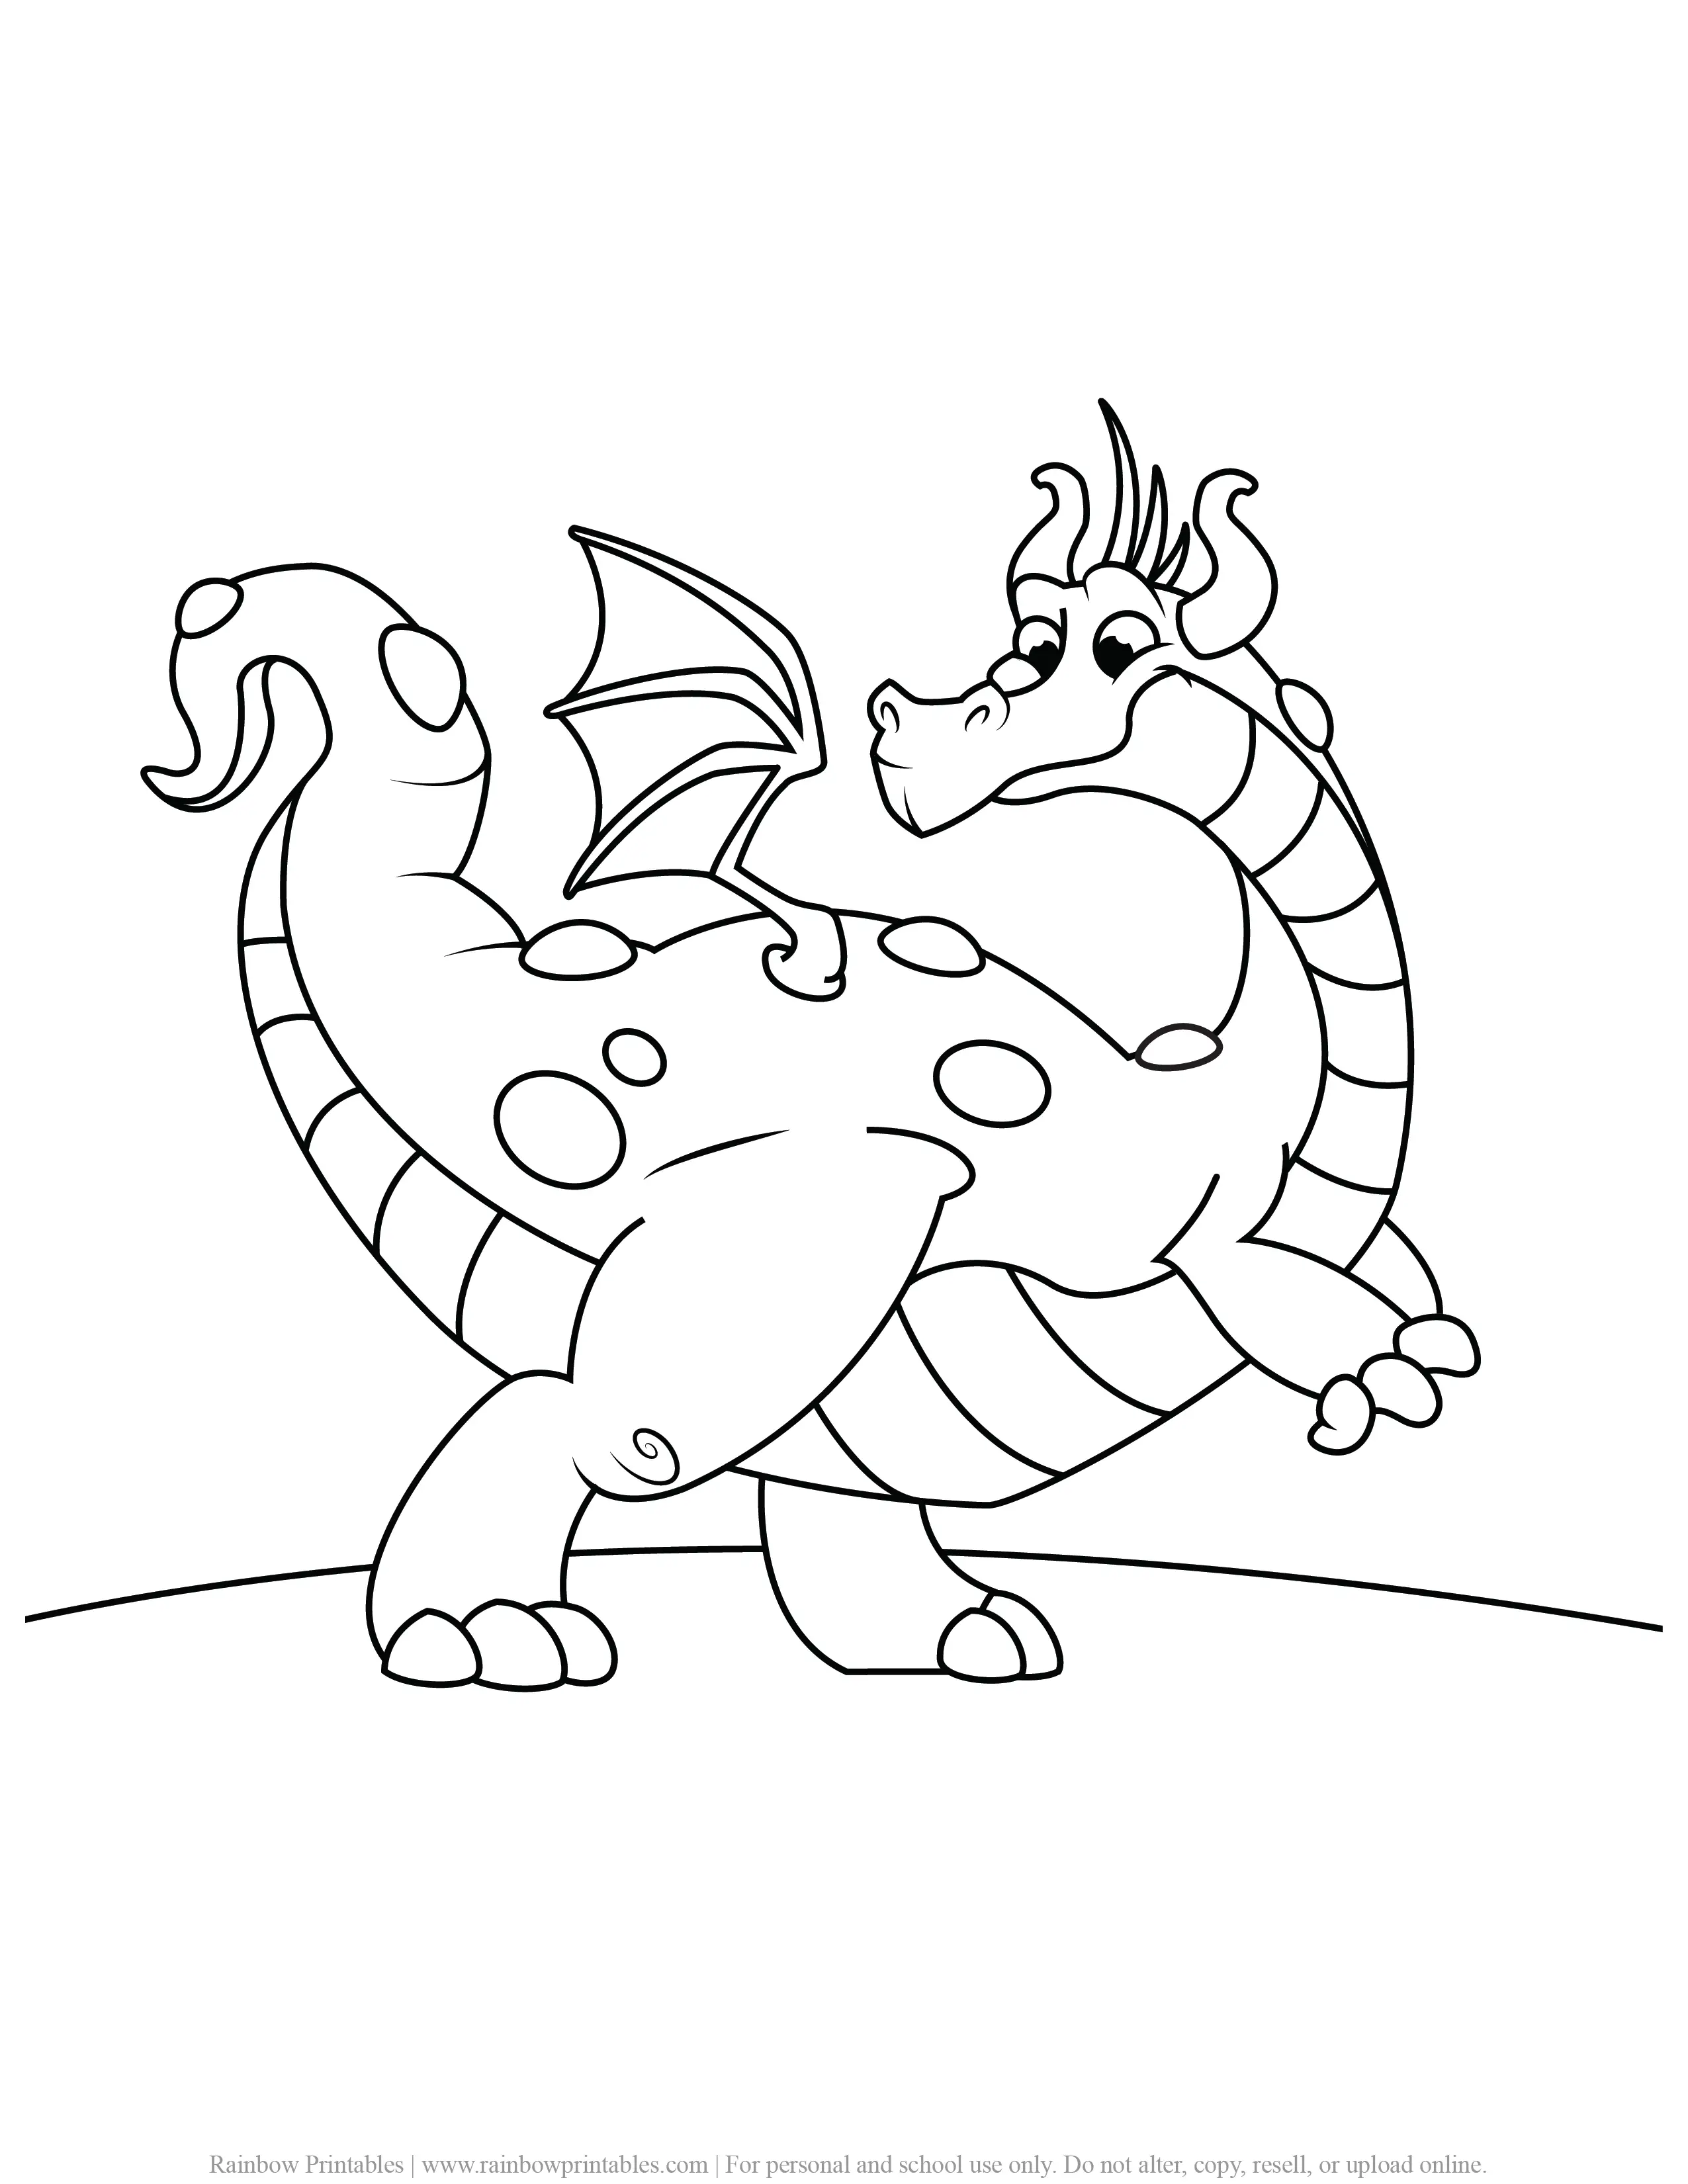 Dragon Coloring Pages - Rainbow Printables